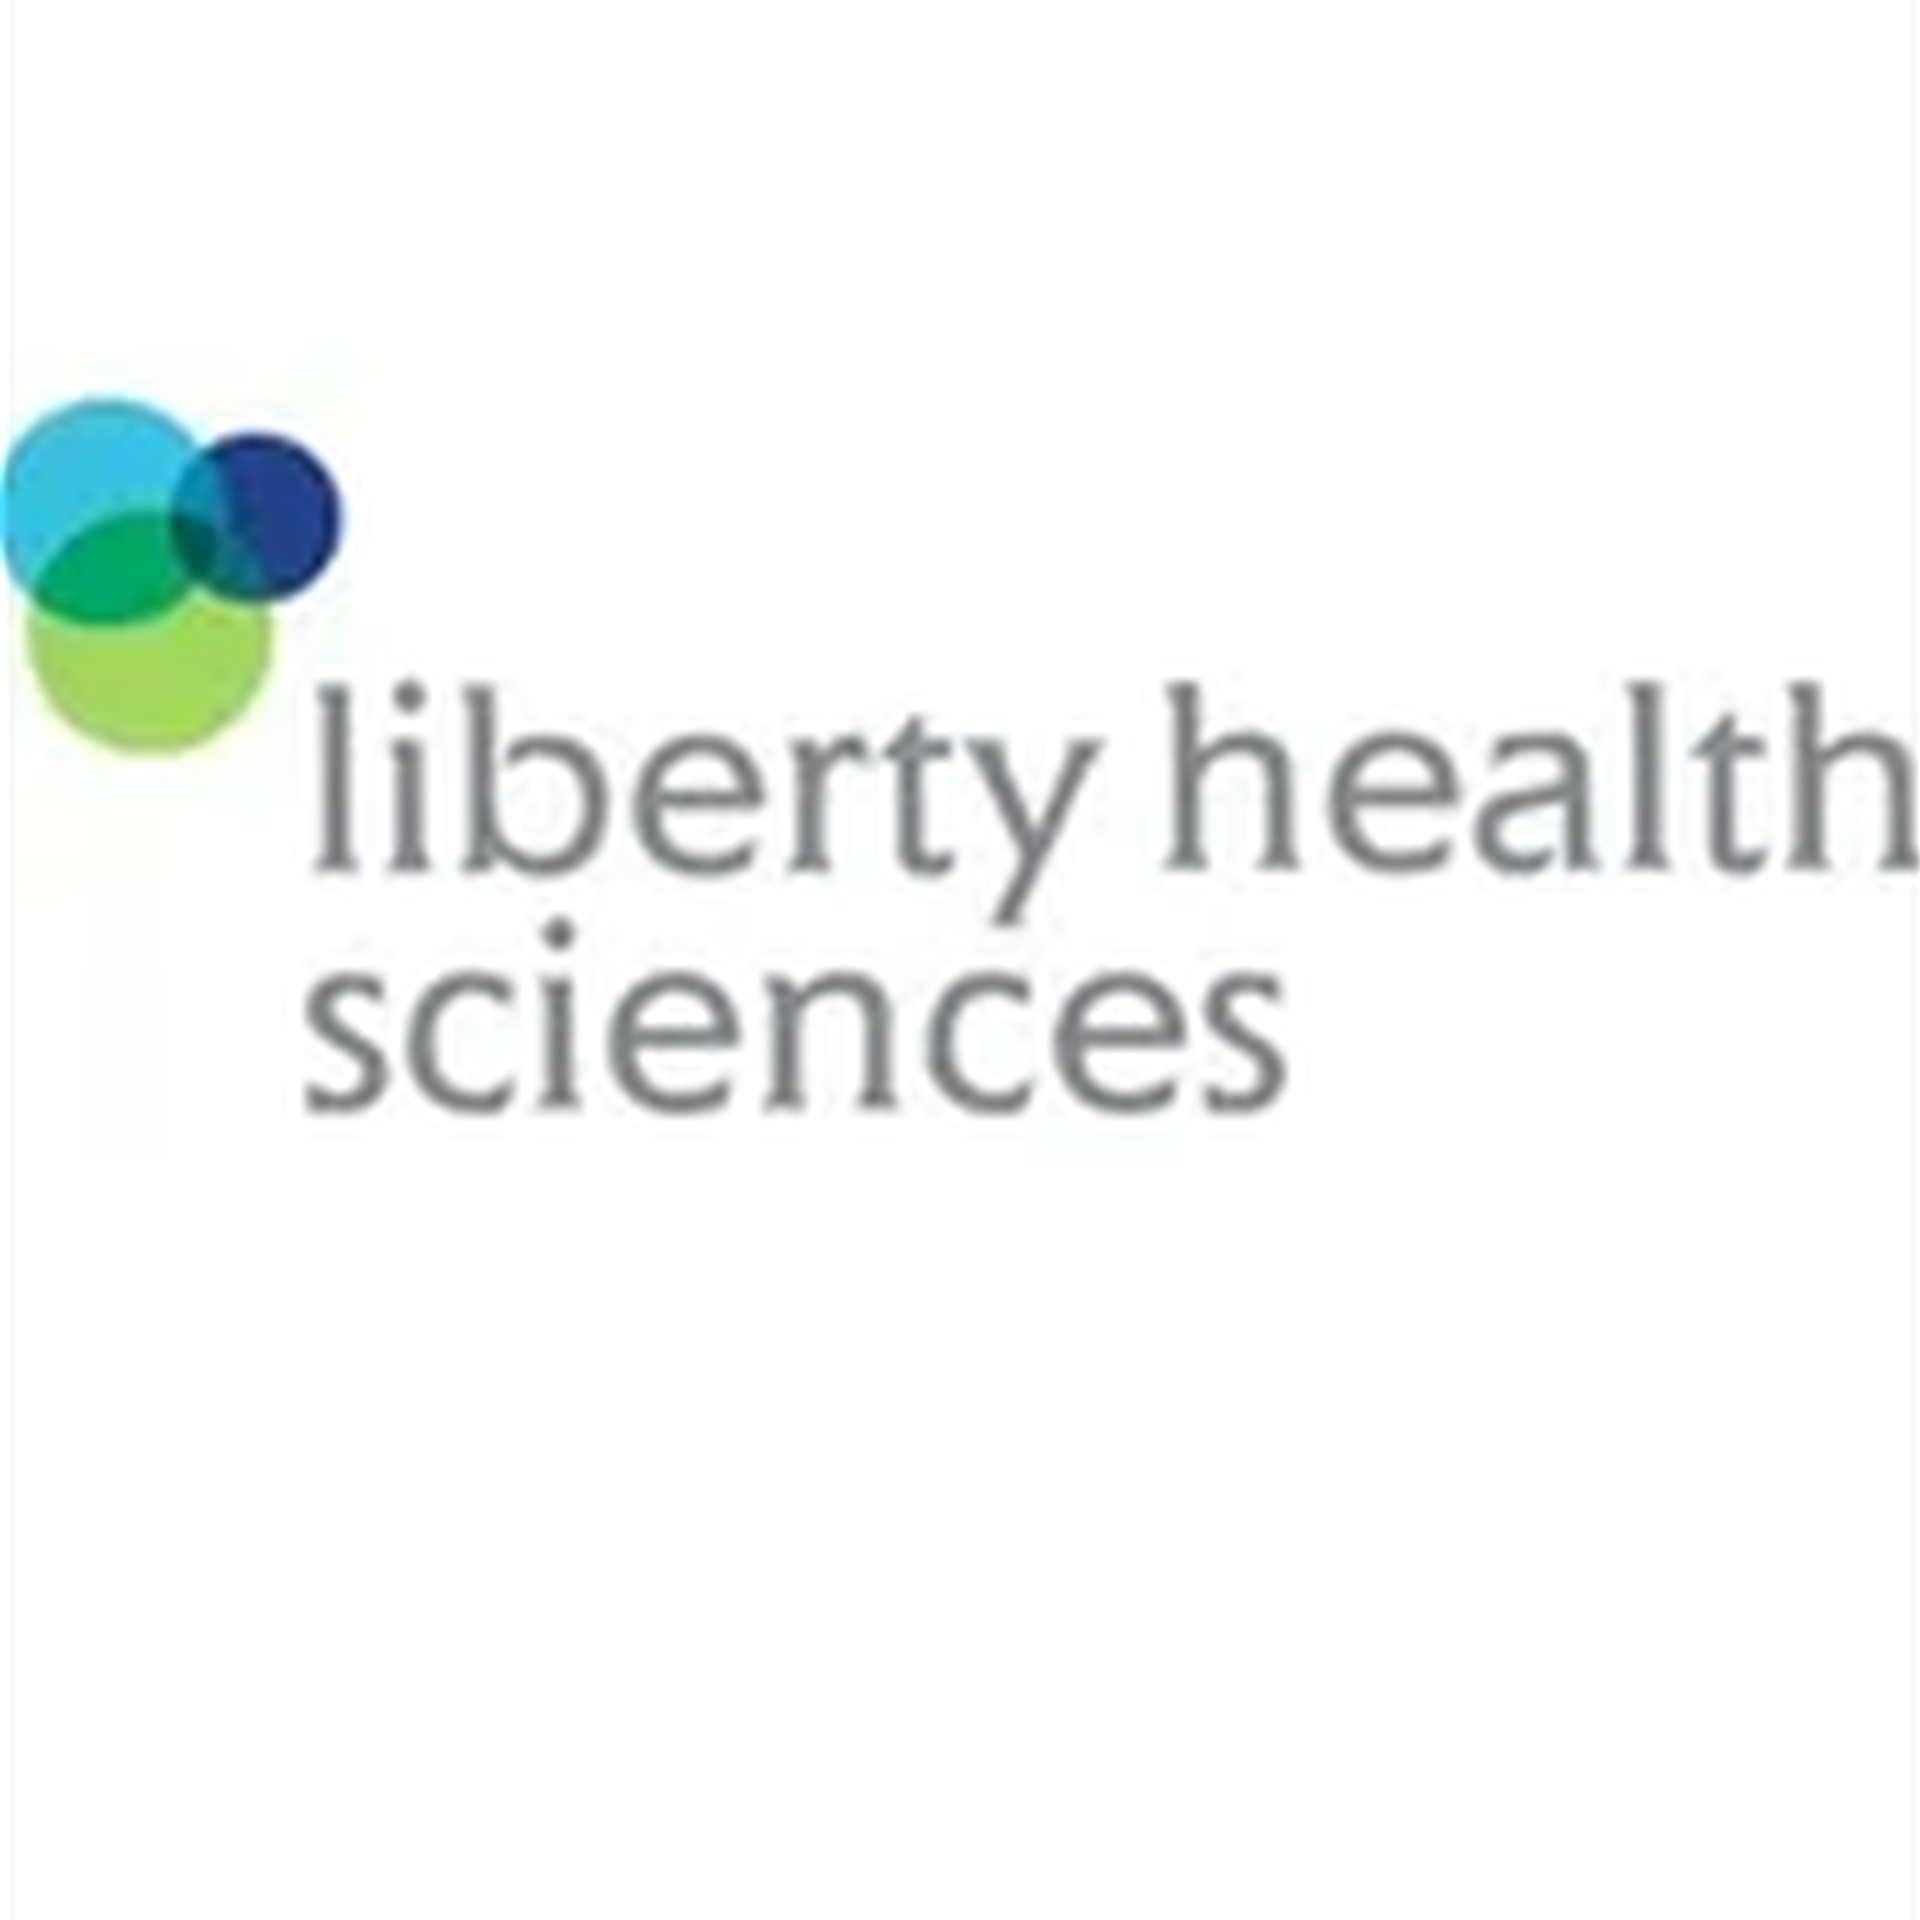 Liberty Health Sciences - St Augustine Deals | Leafly